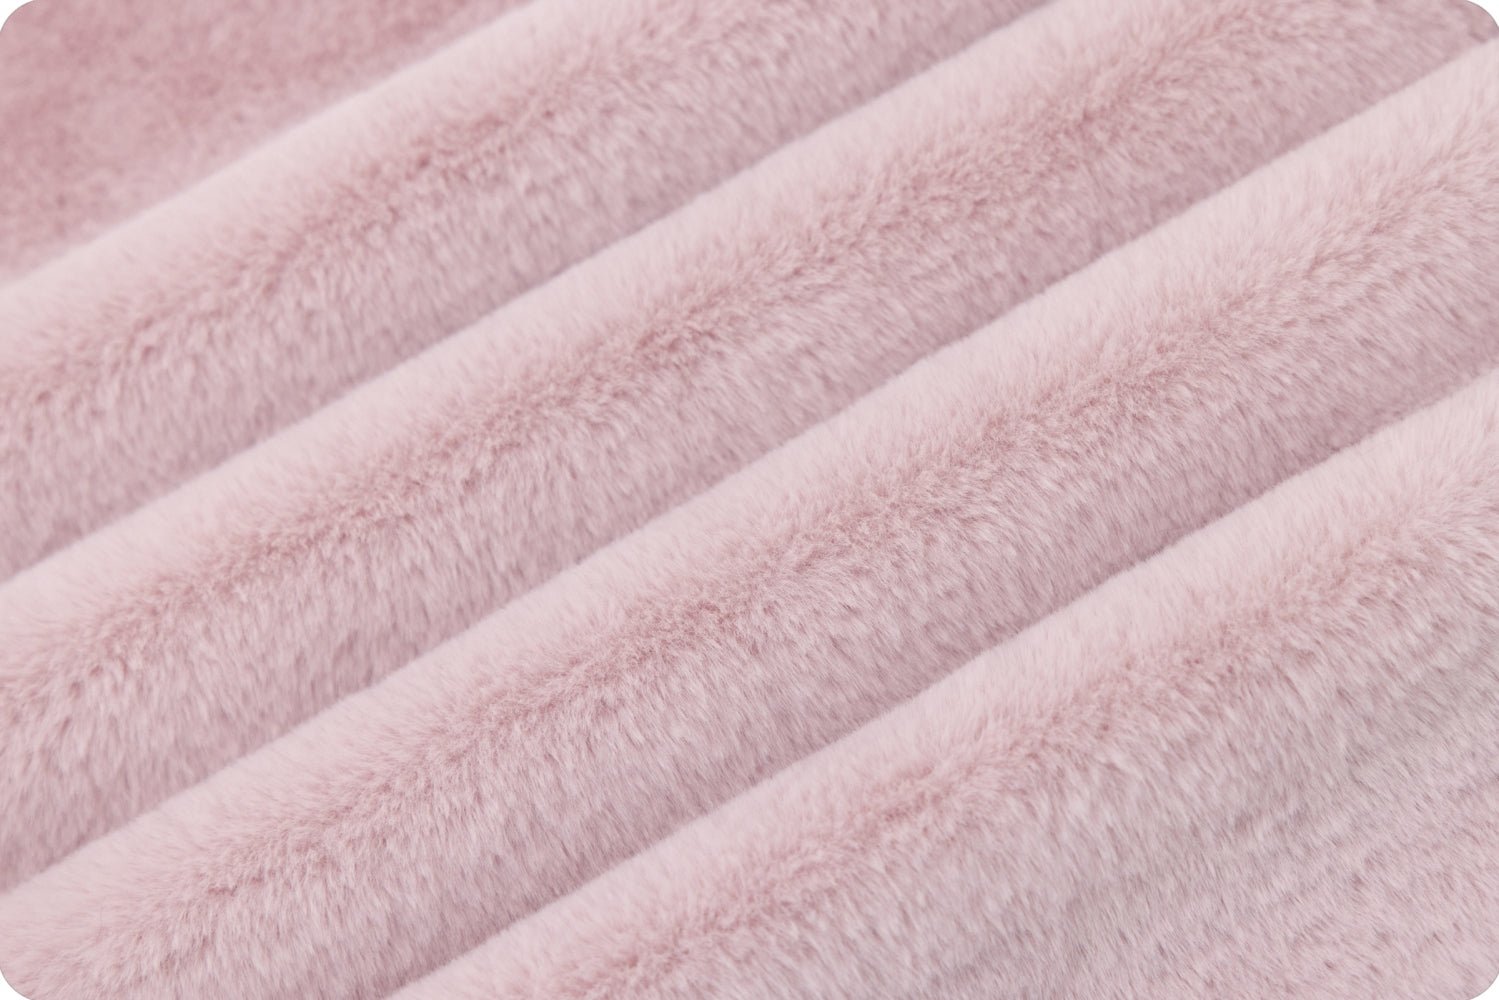 Shannon Fabrics Luxe Cuddle Encore Rosewater Minky Fabric - On Pins & Needles Quilting Co.